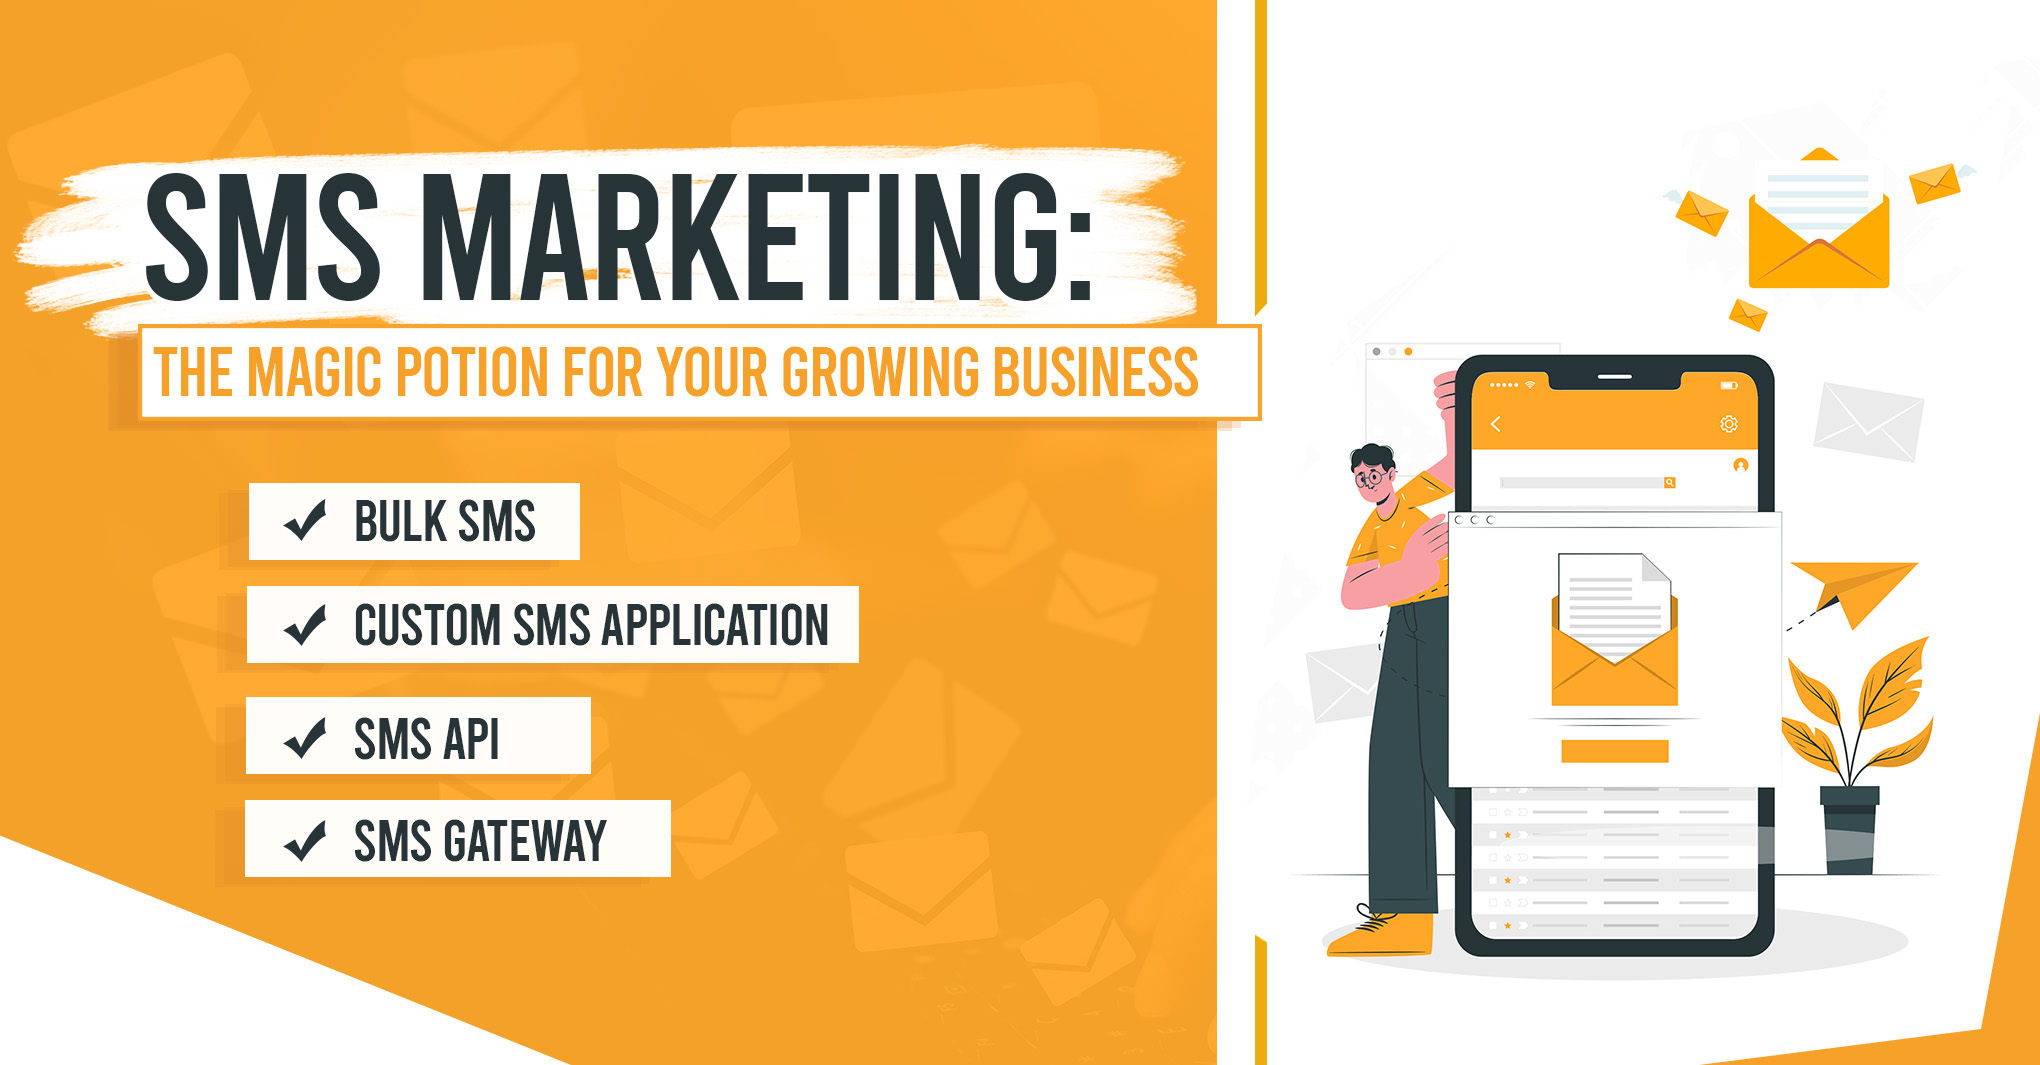 SMS Marketing | The Magic Potion For Your Growing Business